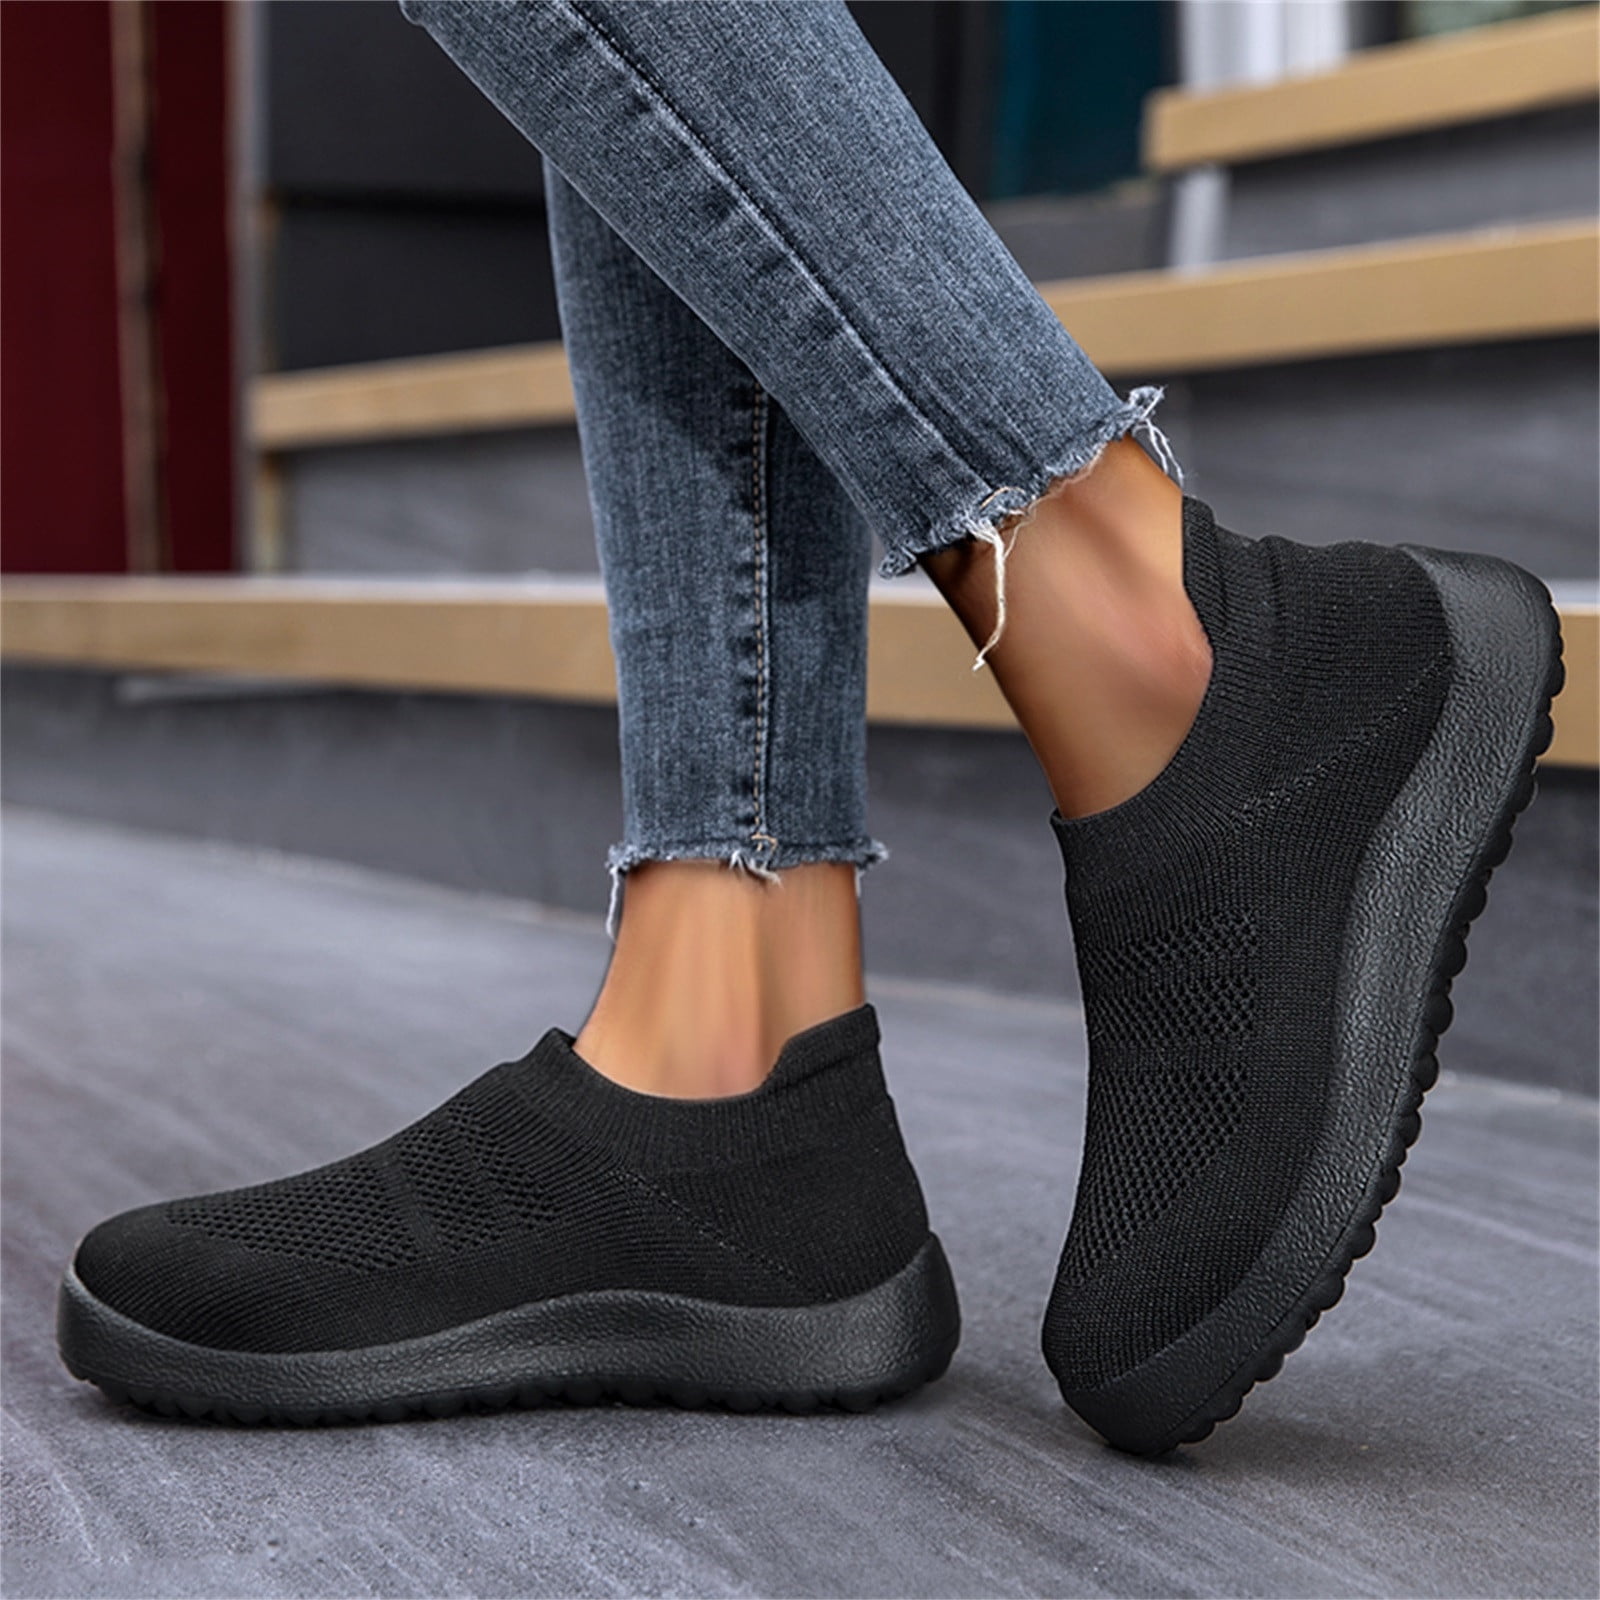 Vedolay Platform Sneakers for Men Mens Casual Sneakers Slip On Breathable  Walking Shoes for Ladies,Black 10.5